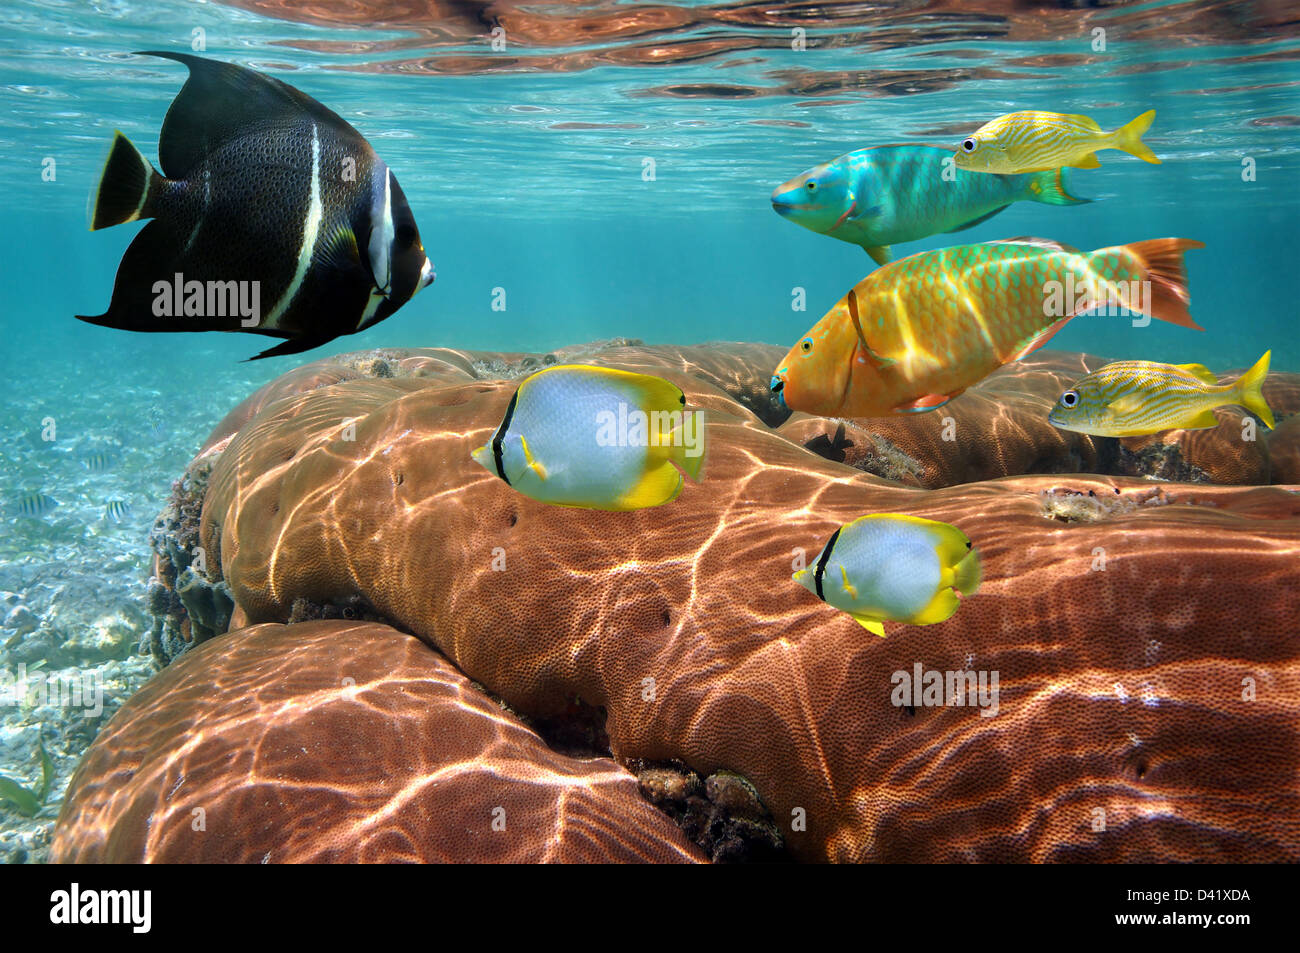 Underwater sea life, colorful tropical fish and coral in shallow water, Caribbean sea Stock Photo